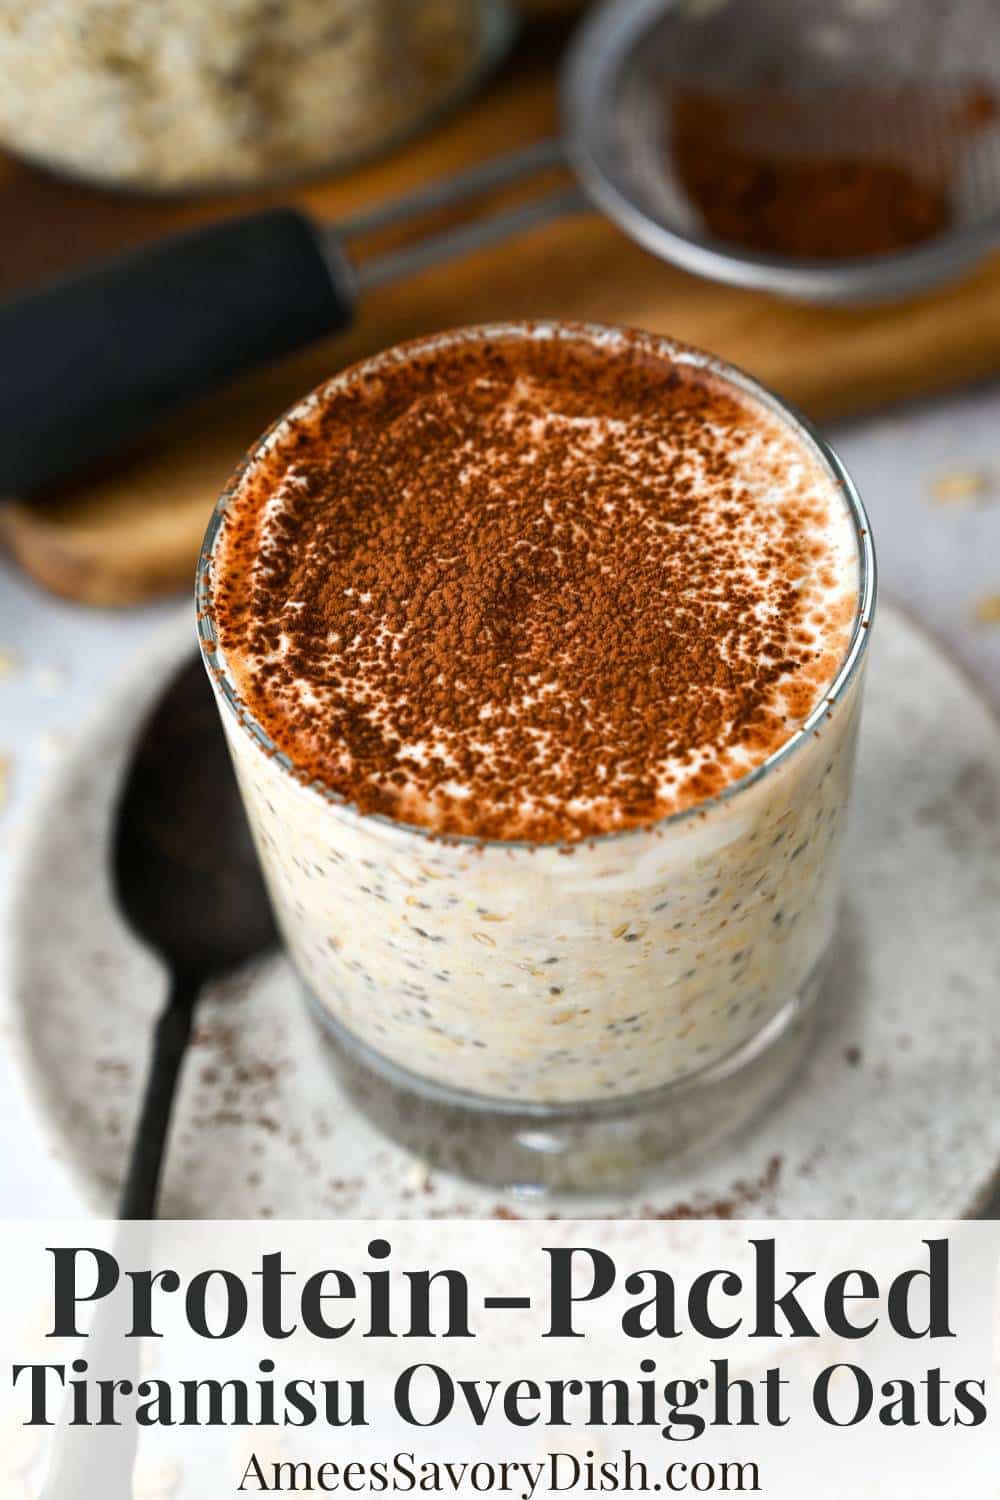 Packed with protein and fiber, these tiramisu protein overnight oats offer a decadent yet wholesome start to your day with 30 grams of protein per serving! via @Ameessavorydish